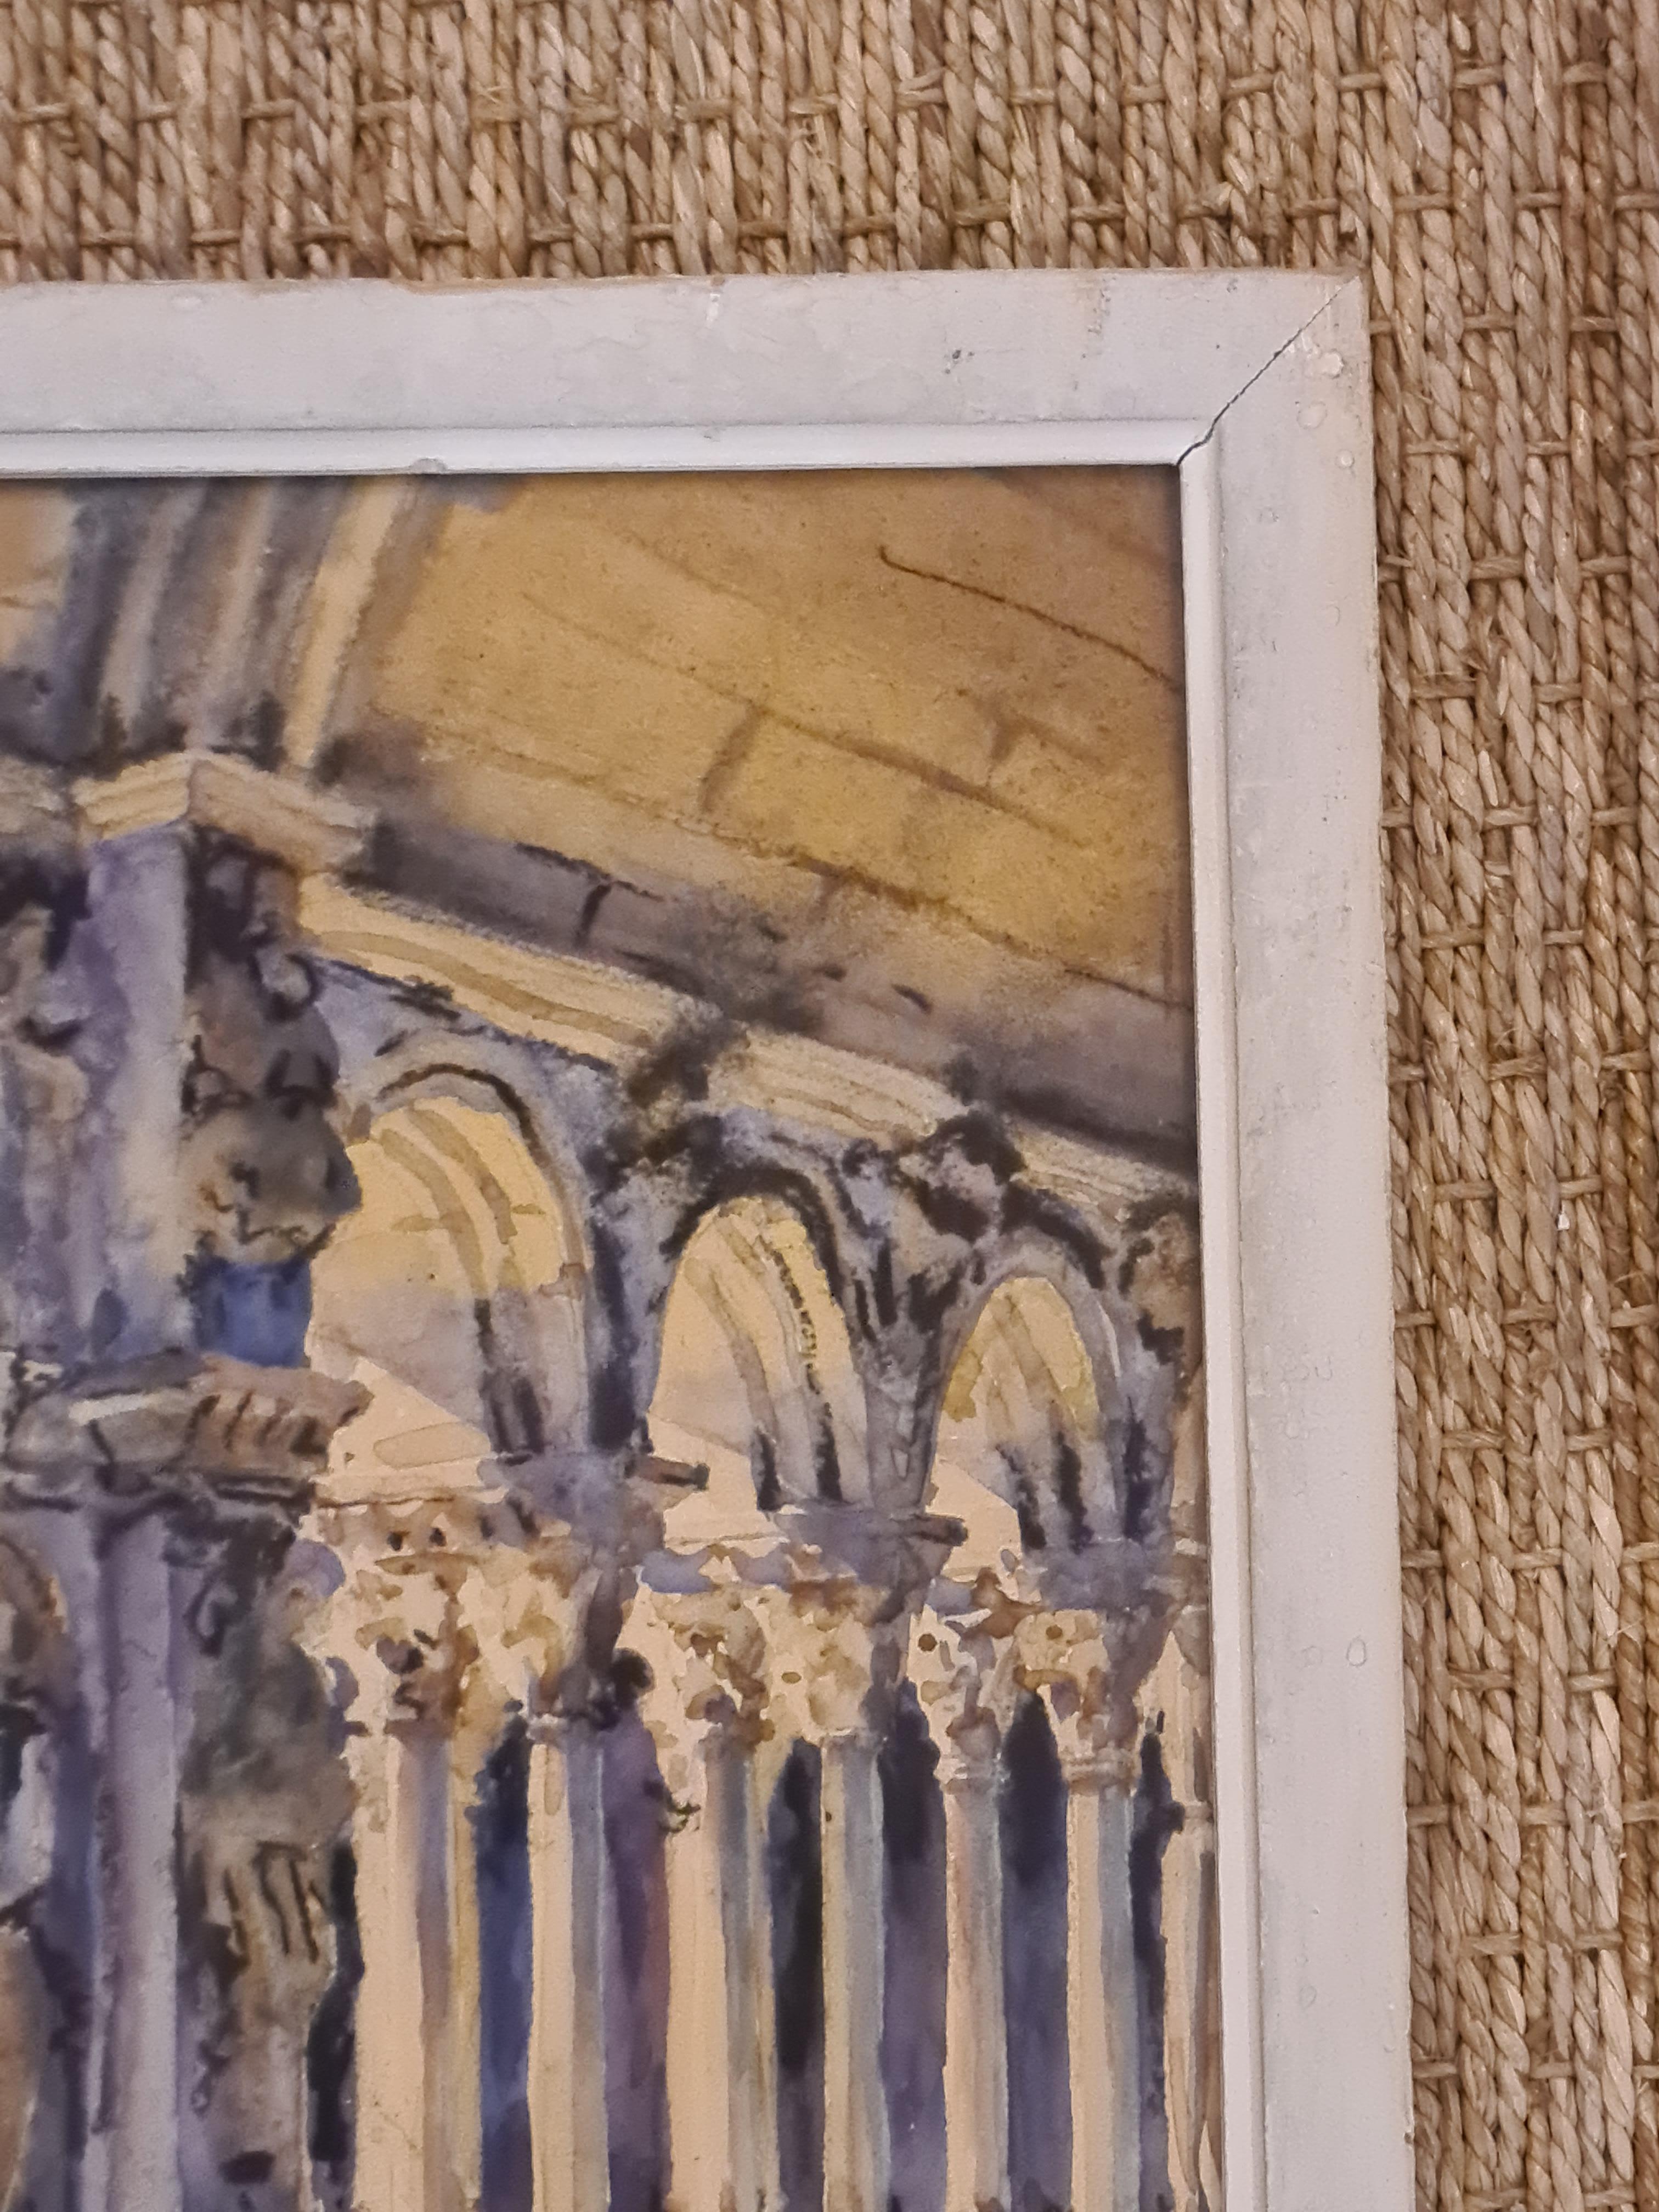 Mid 20th Century French architectural watercolour on paper of the Cloiture de St Trophime, in Arles. South of France by Georges Chappuis. Signed bottom left, in plain wood frame. (We will remove the glass for shipping).

A charming rendition of this